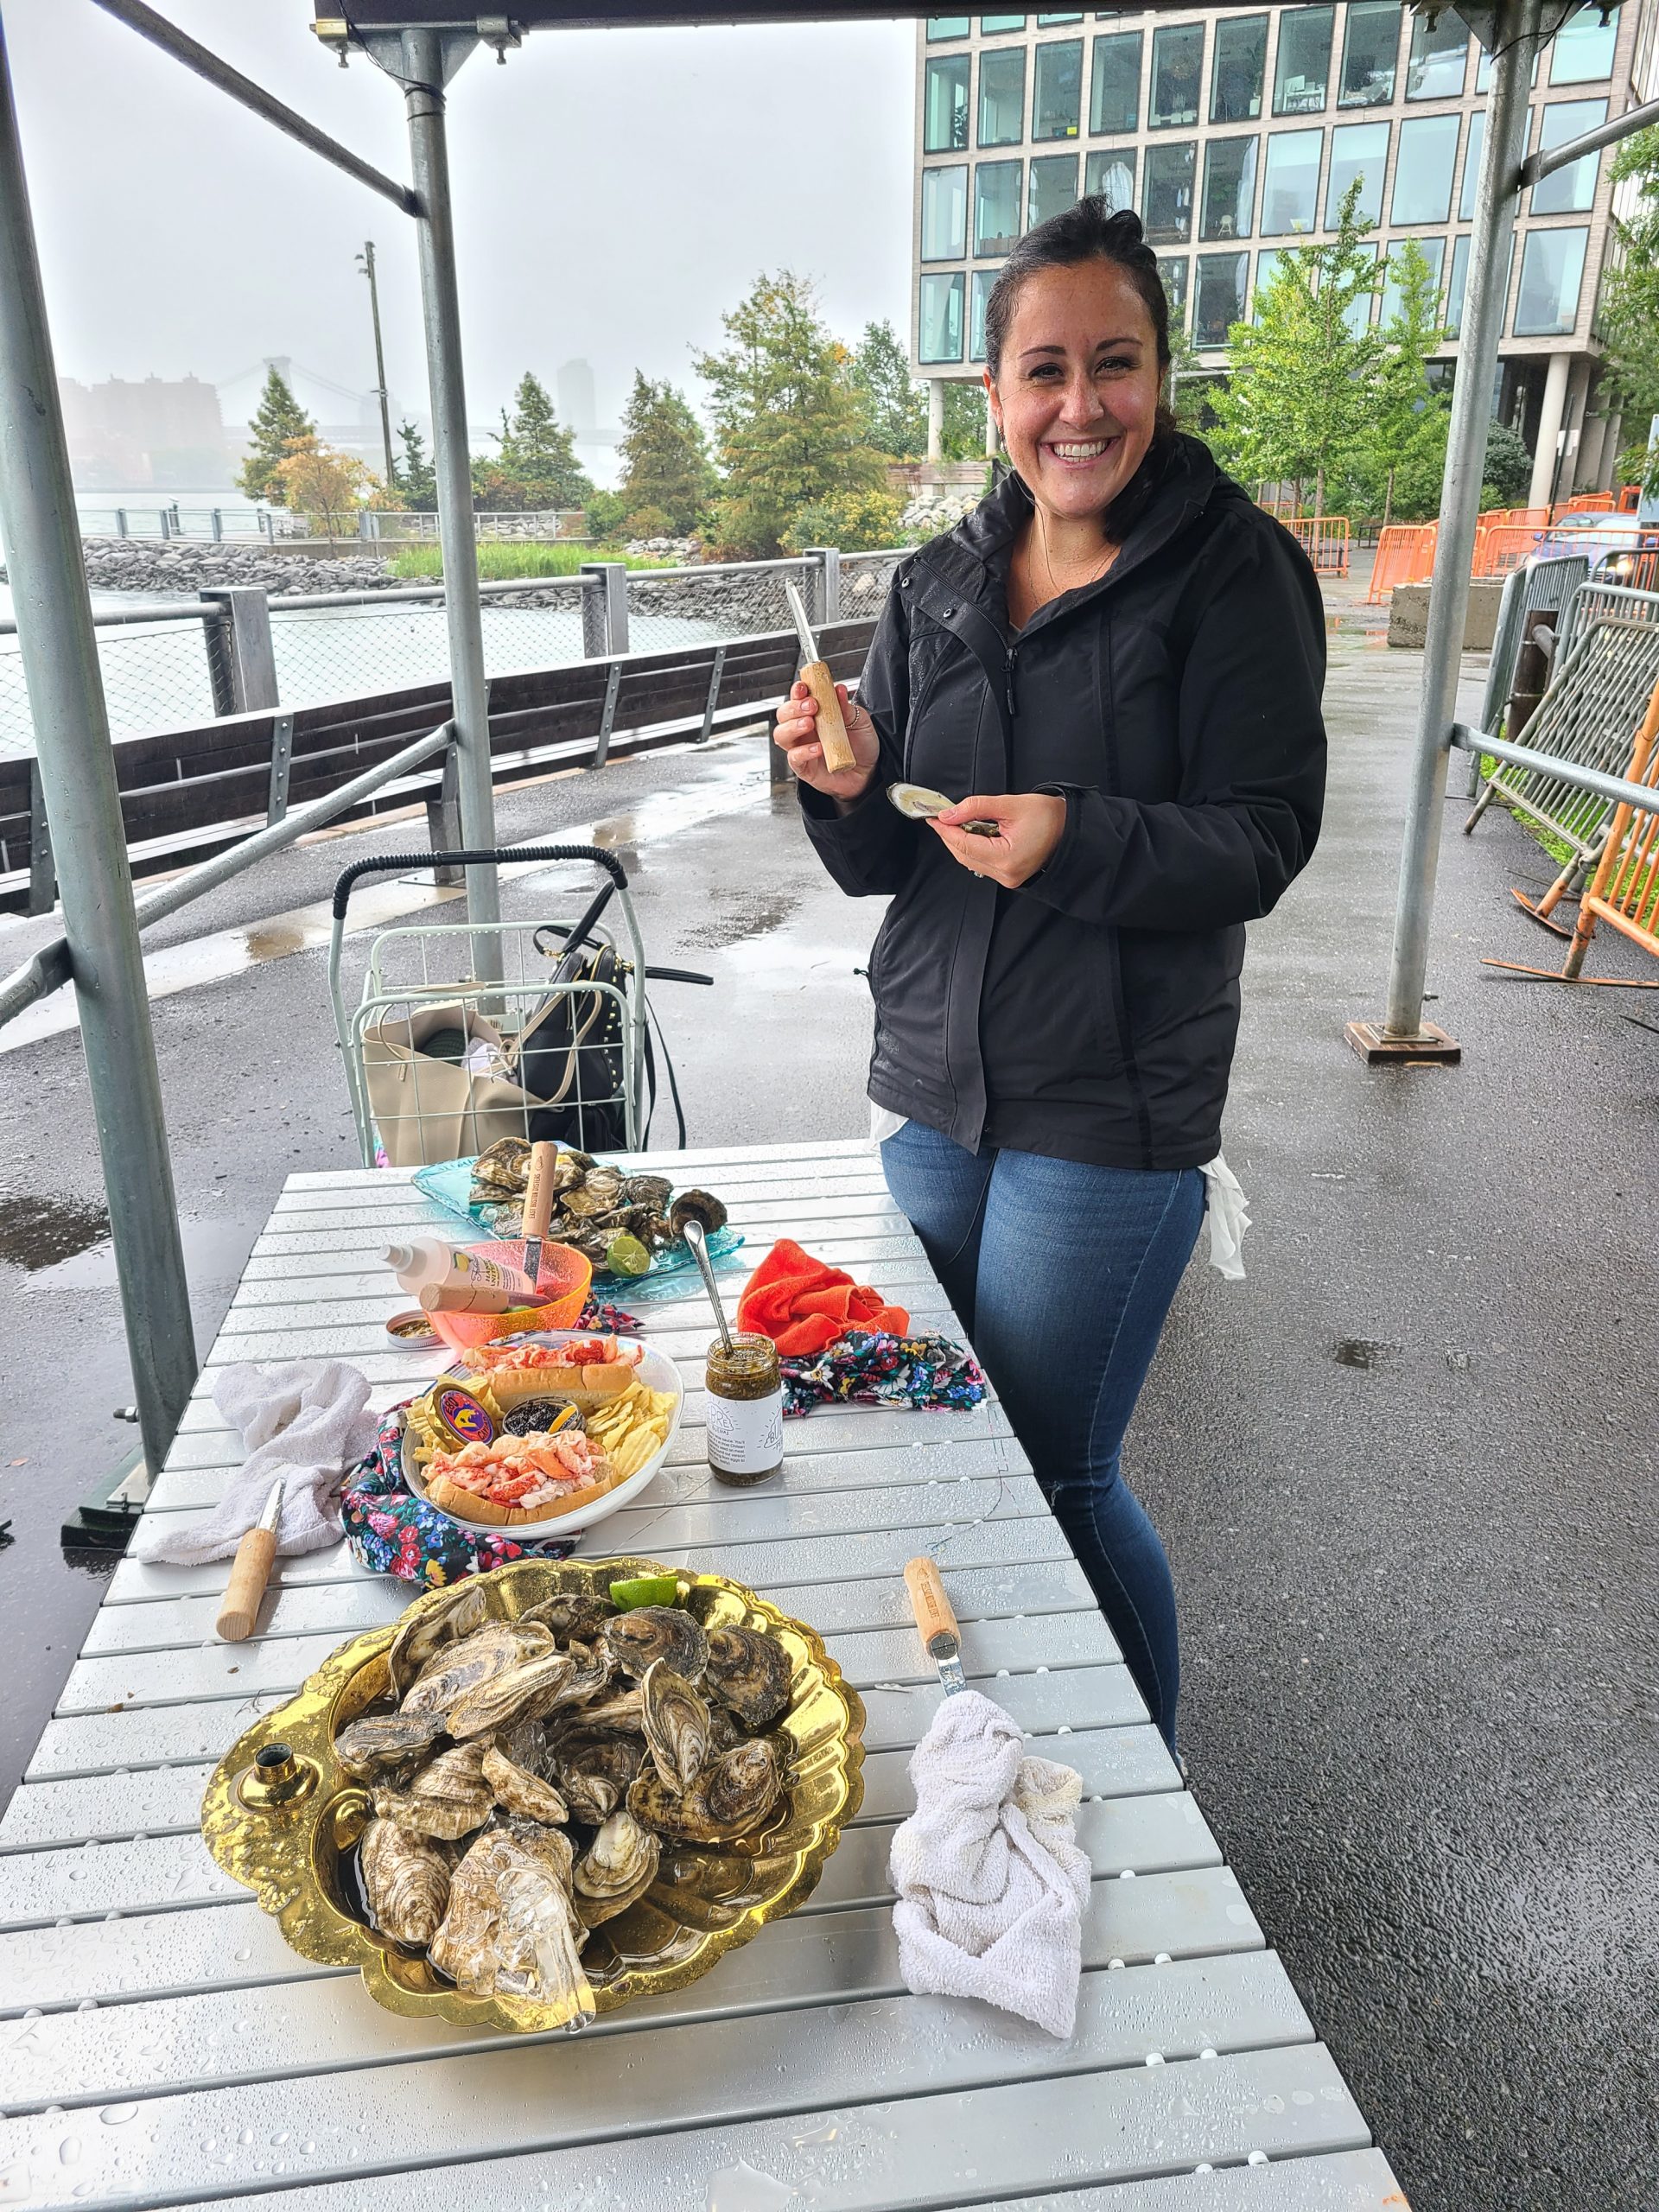 A woman poses while shucking an oyster